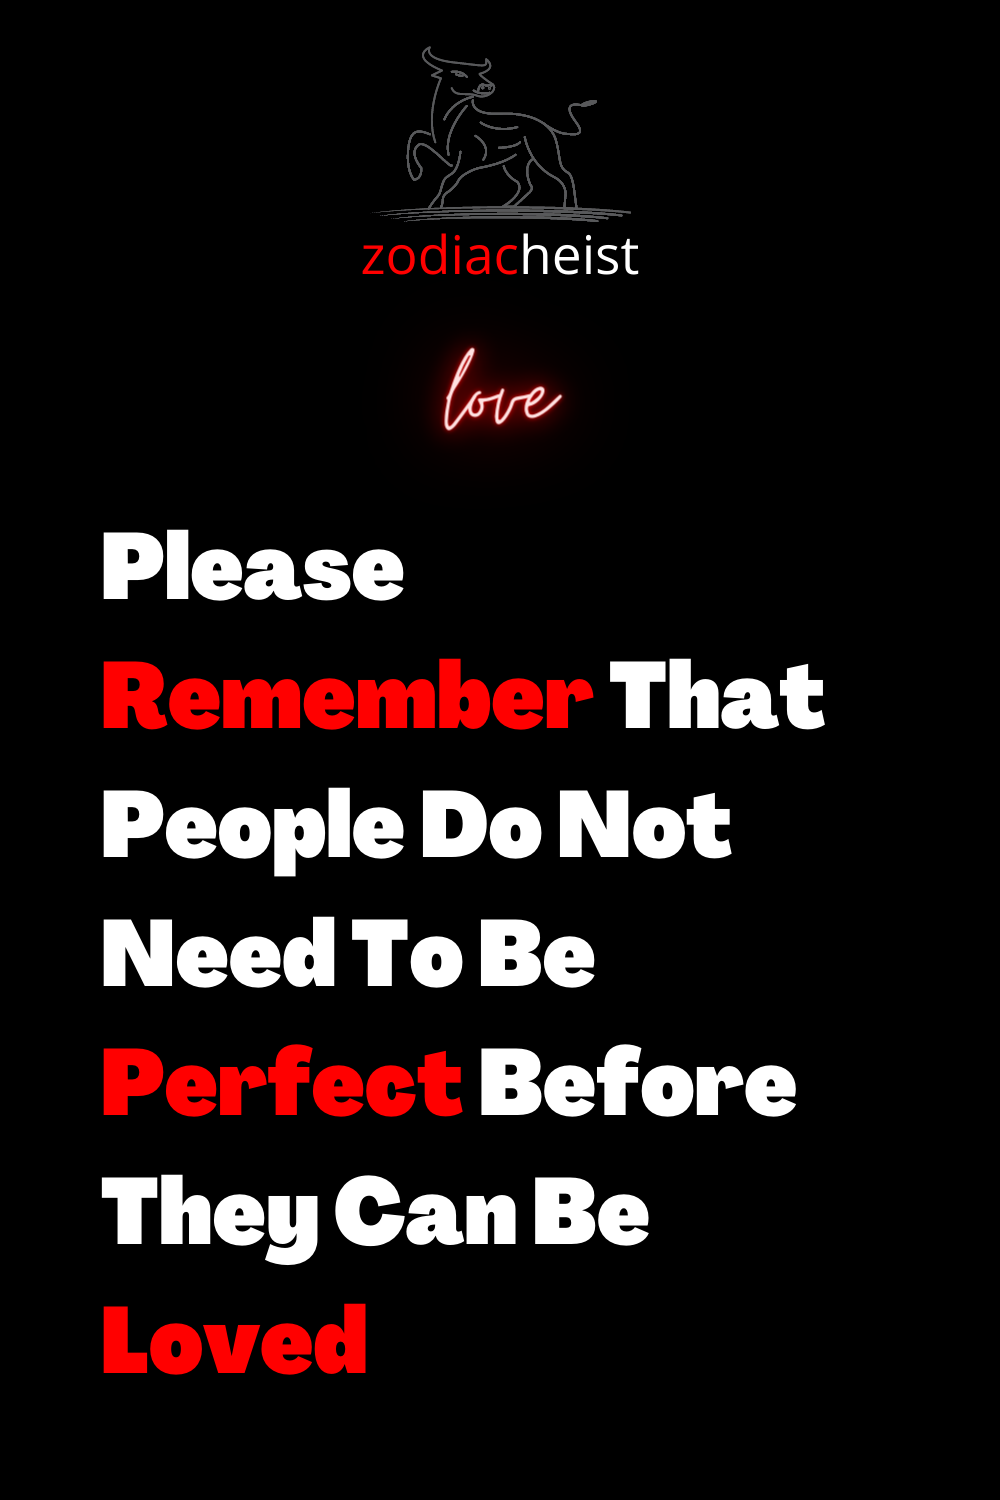 Please Remember That People Do Not Need To Be Perfect Before They Can Be Loved